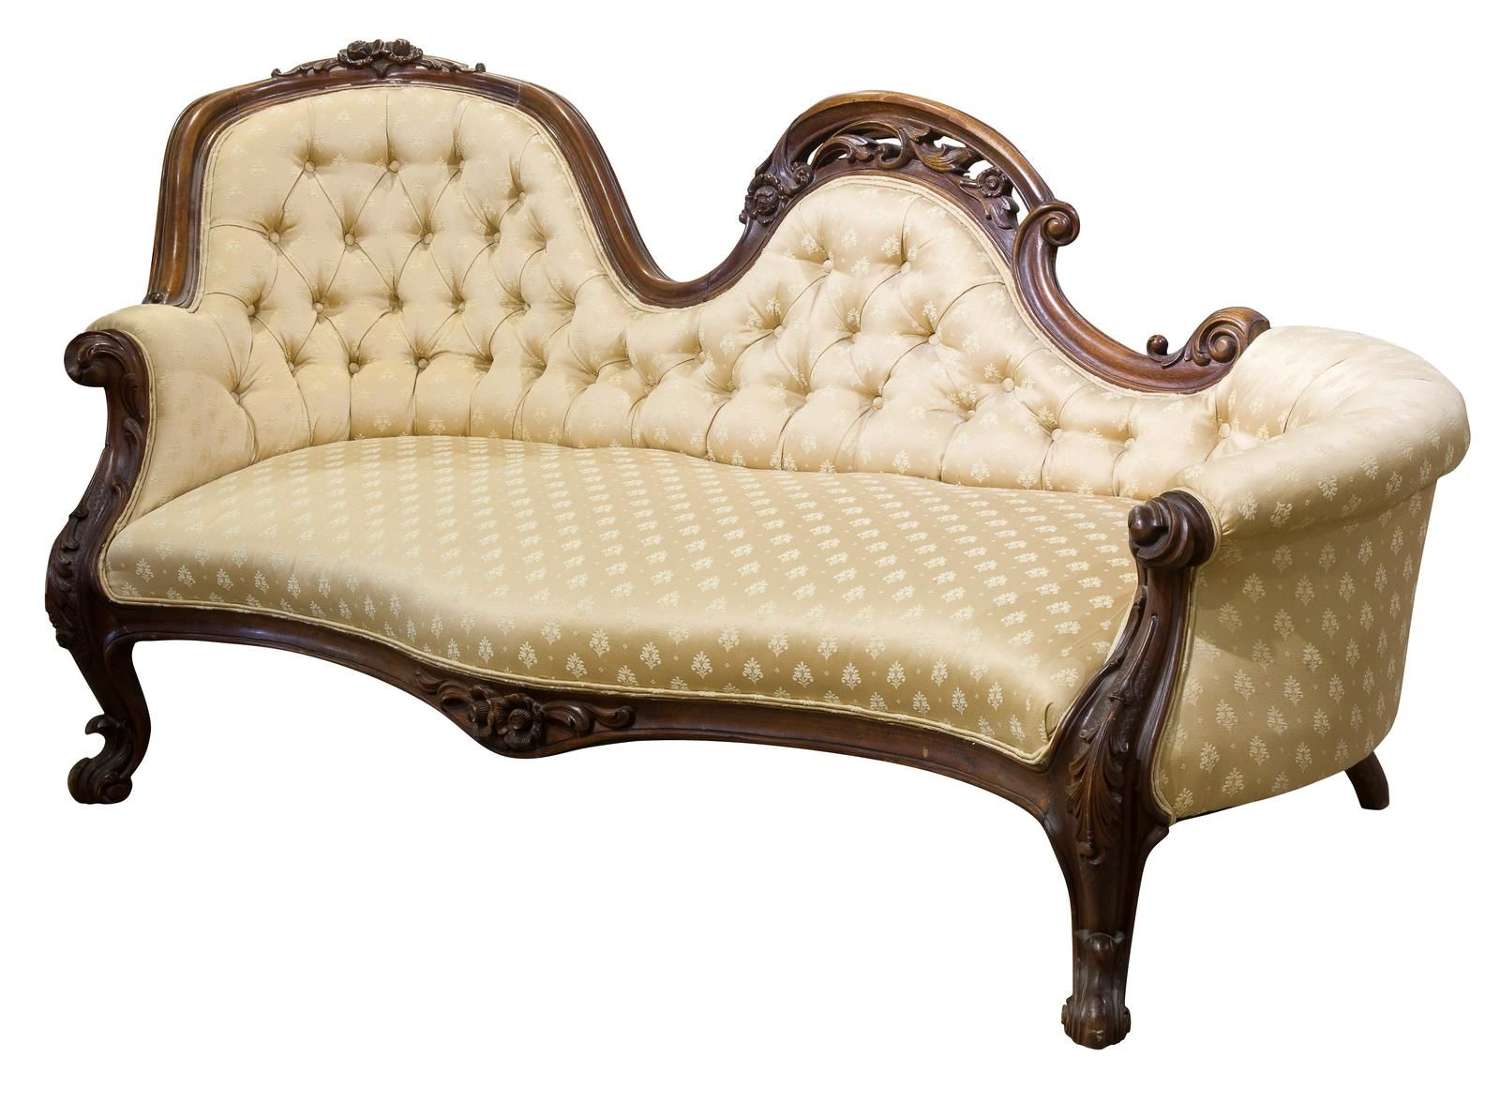 Victorian Period Walnut Double Ended Chaise